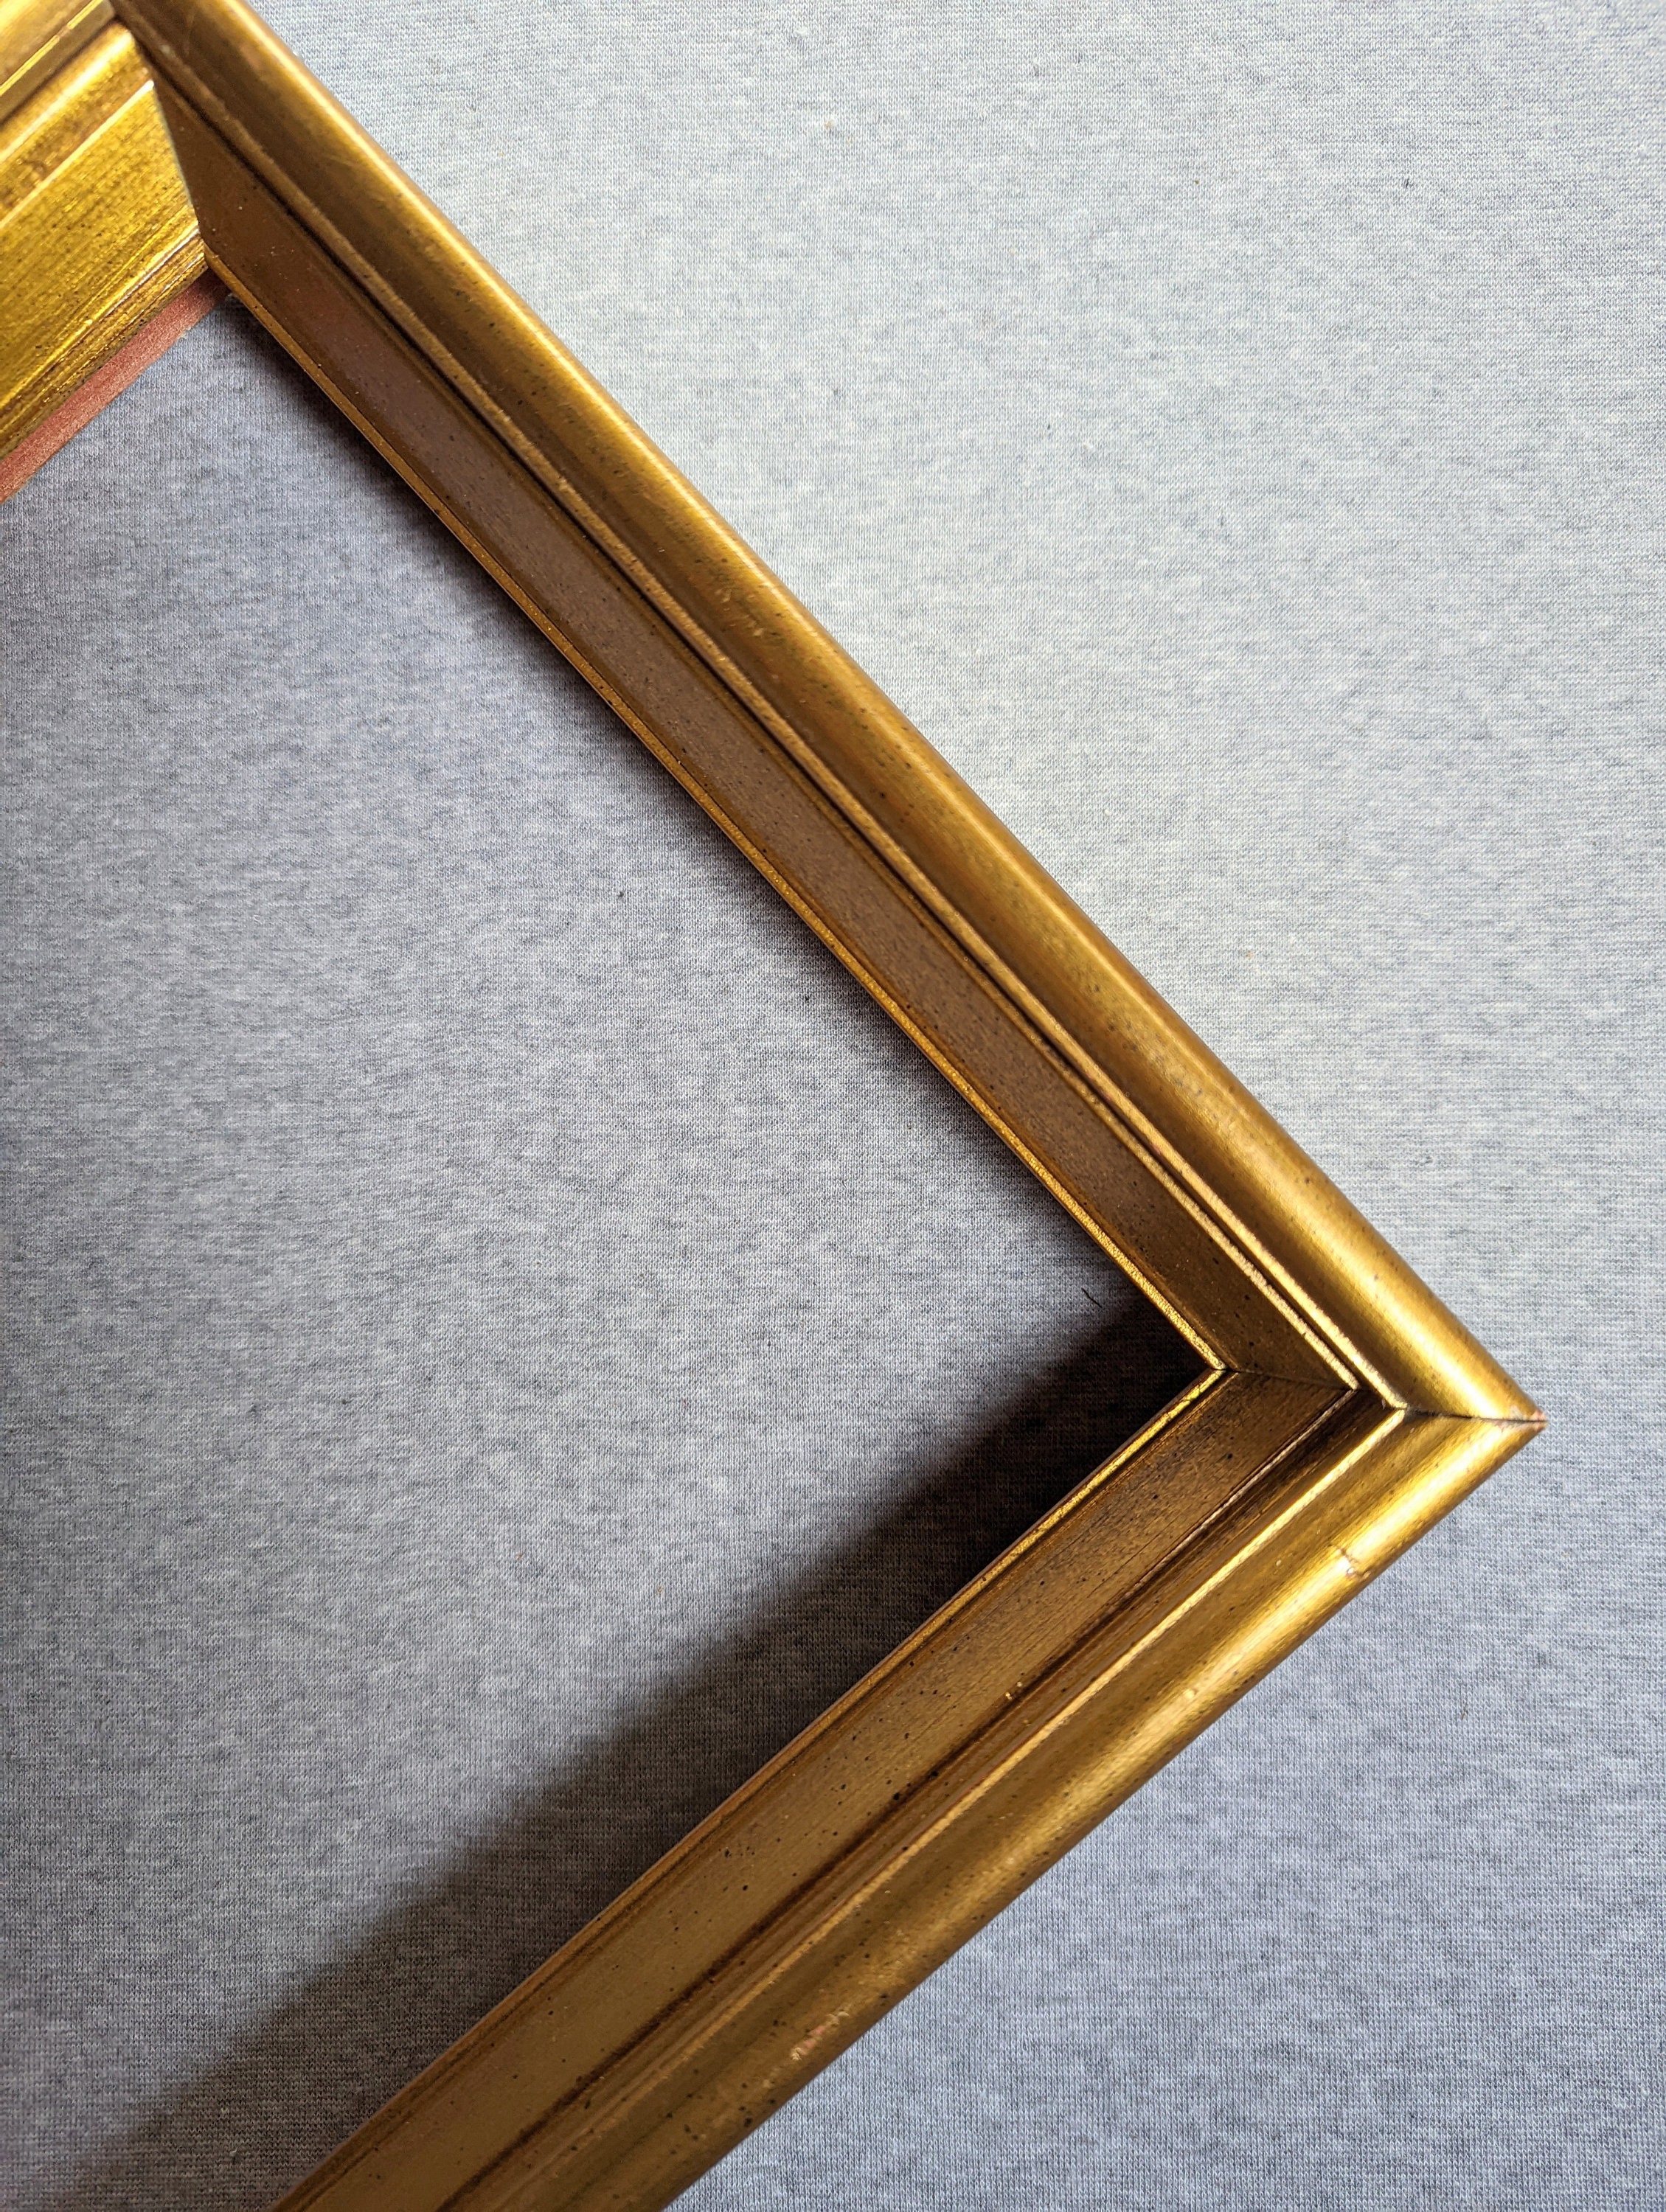 4x10 Frame approximate Size Shadowbox Vintage Tan With 